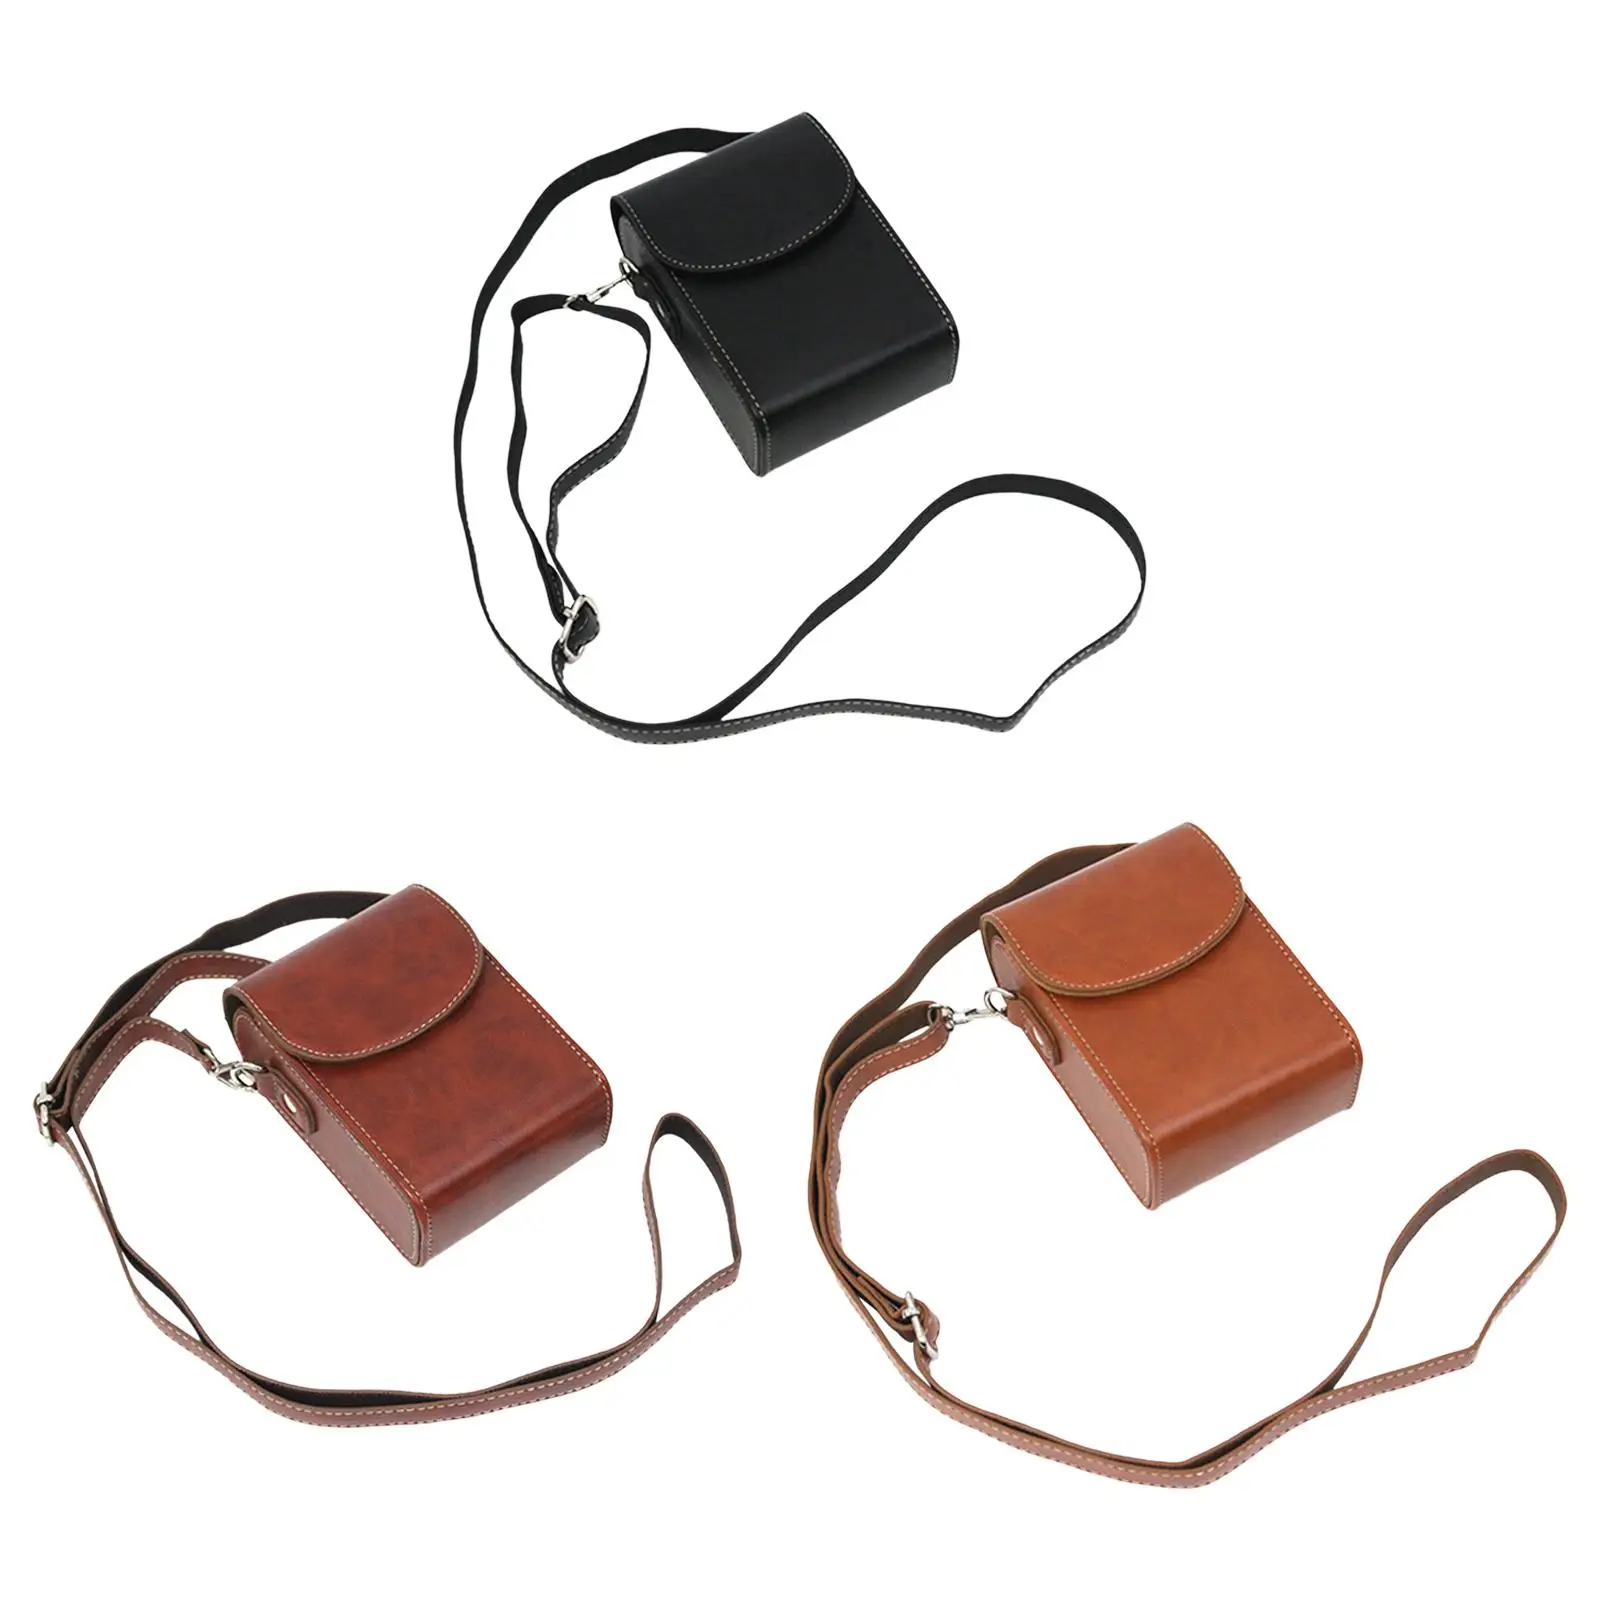 Leather Bag Camera Case Tear Resistant With Detachable Strap